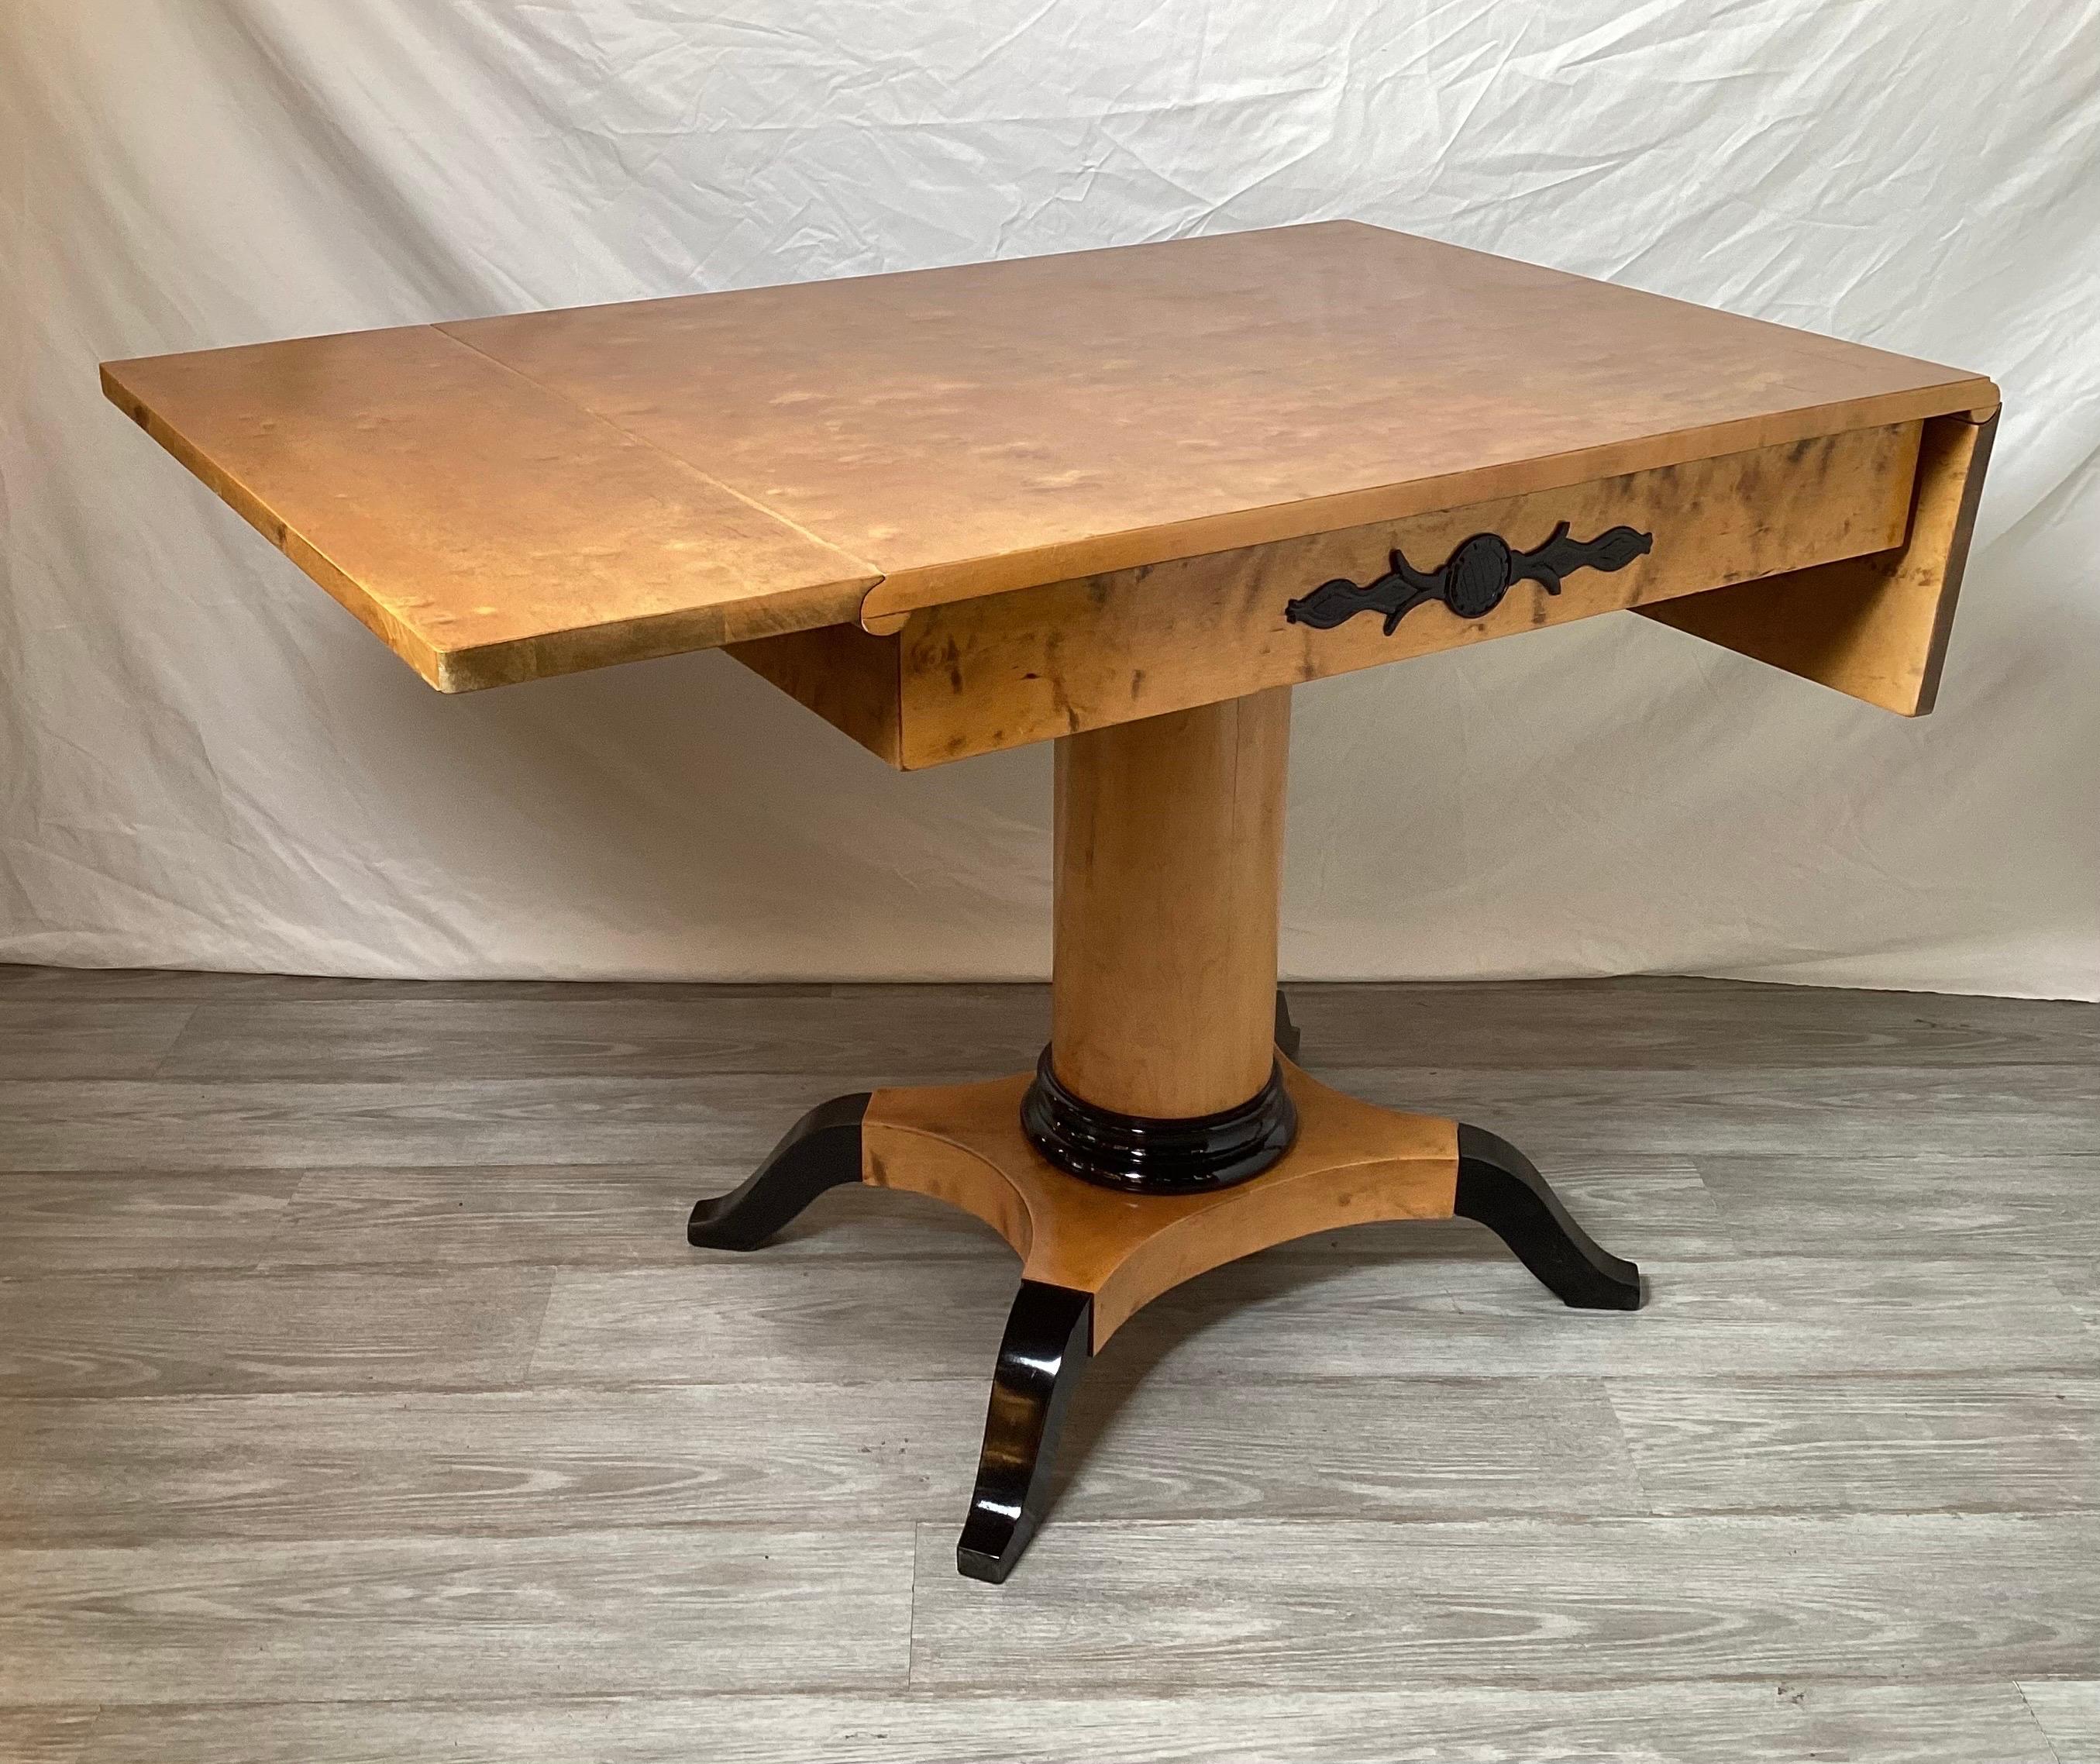 Early 20th Century Blonde Maple and Ebony Biedermeier Style Drop Leaf Table, circa 1900 For Sale